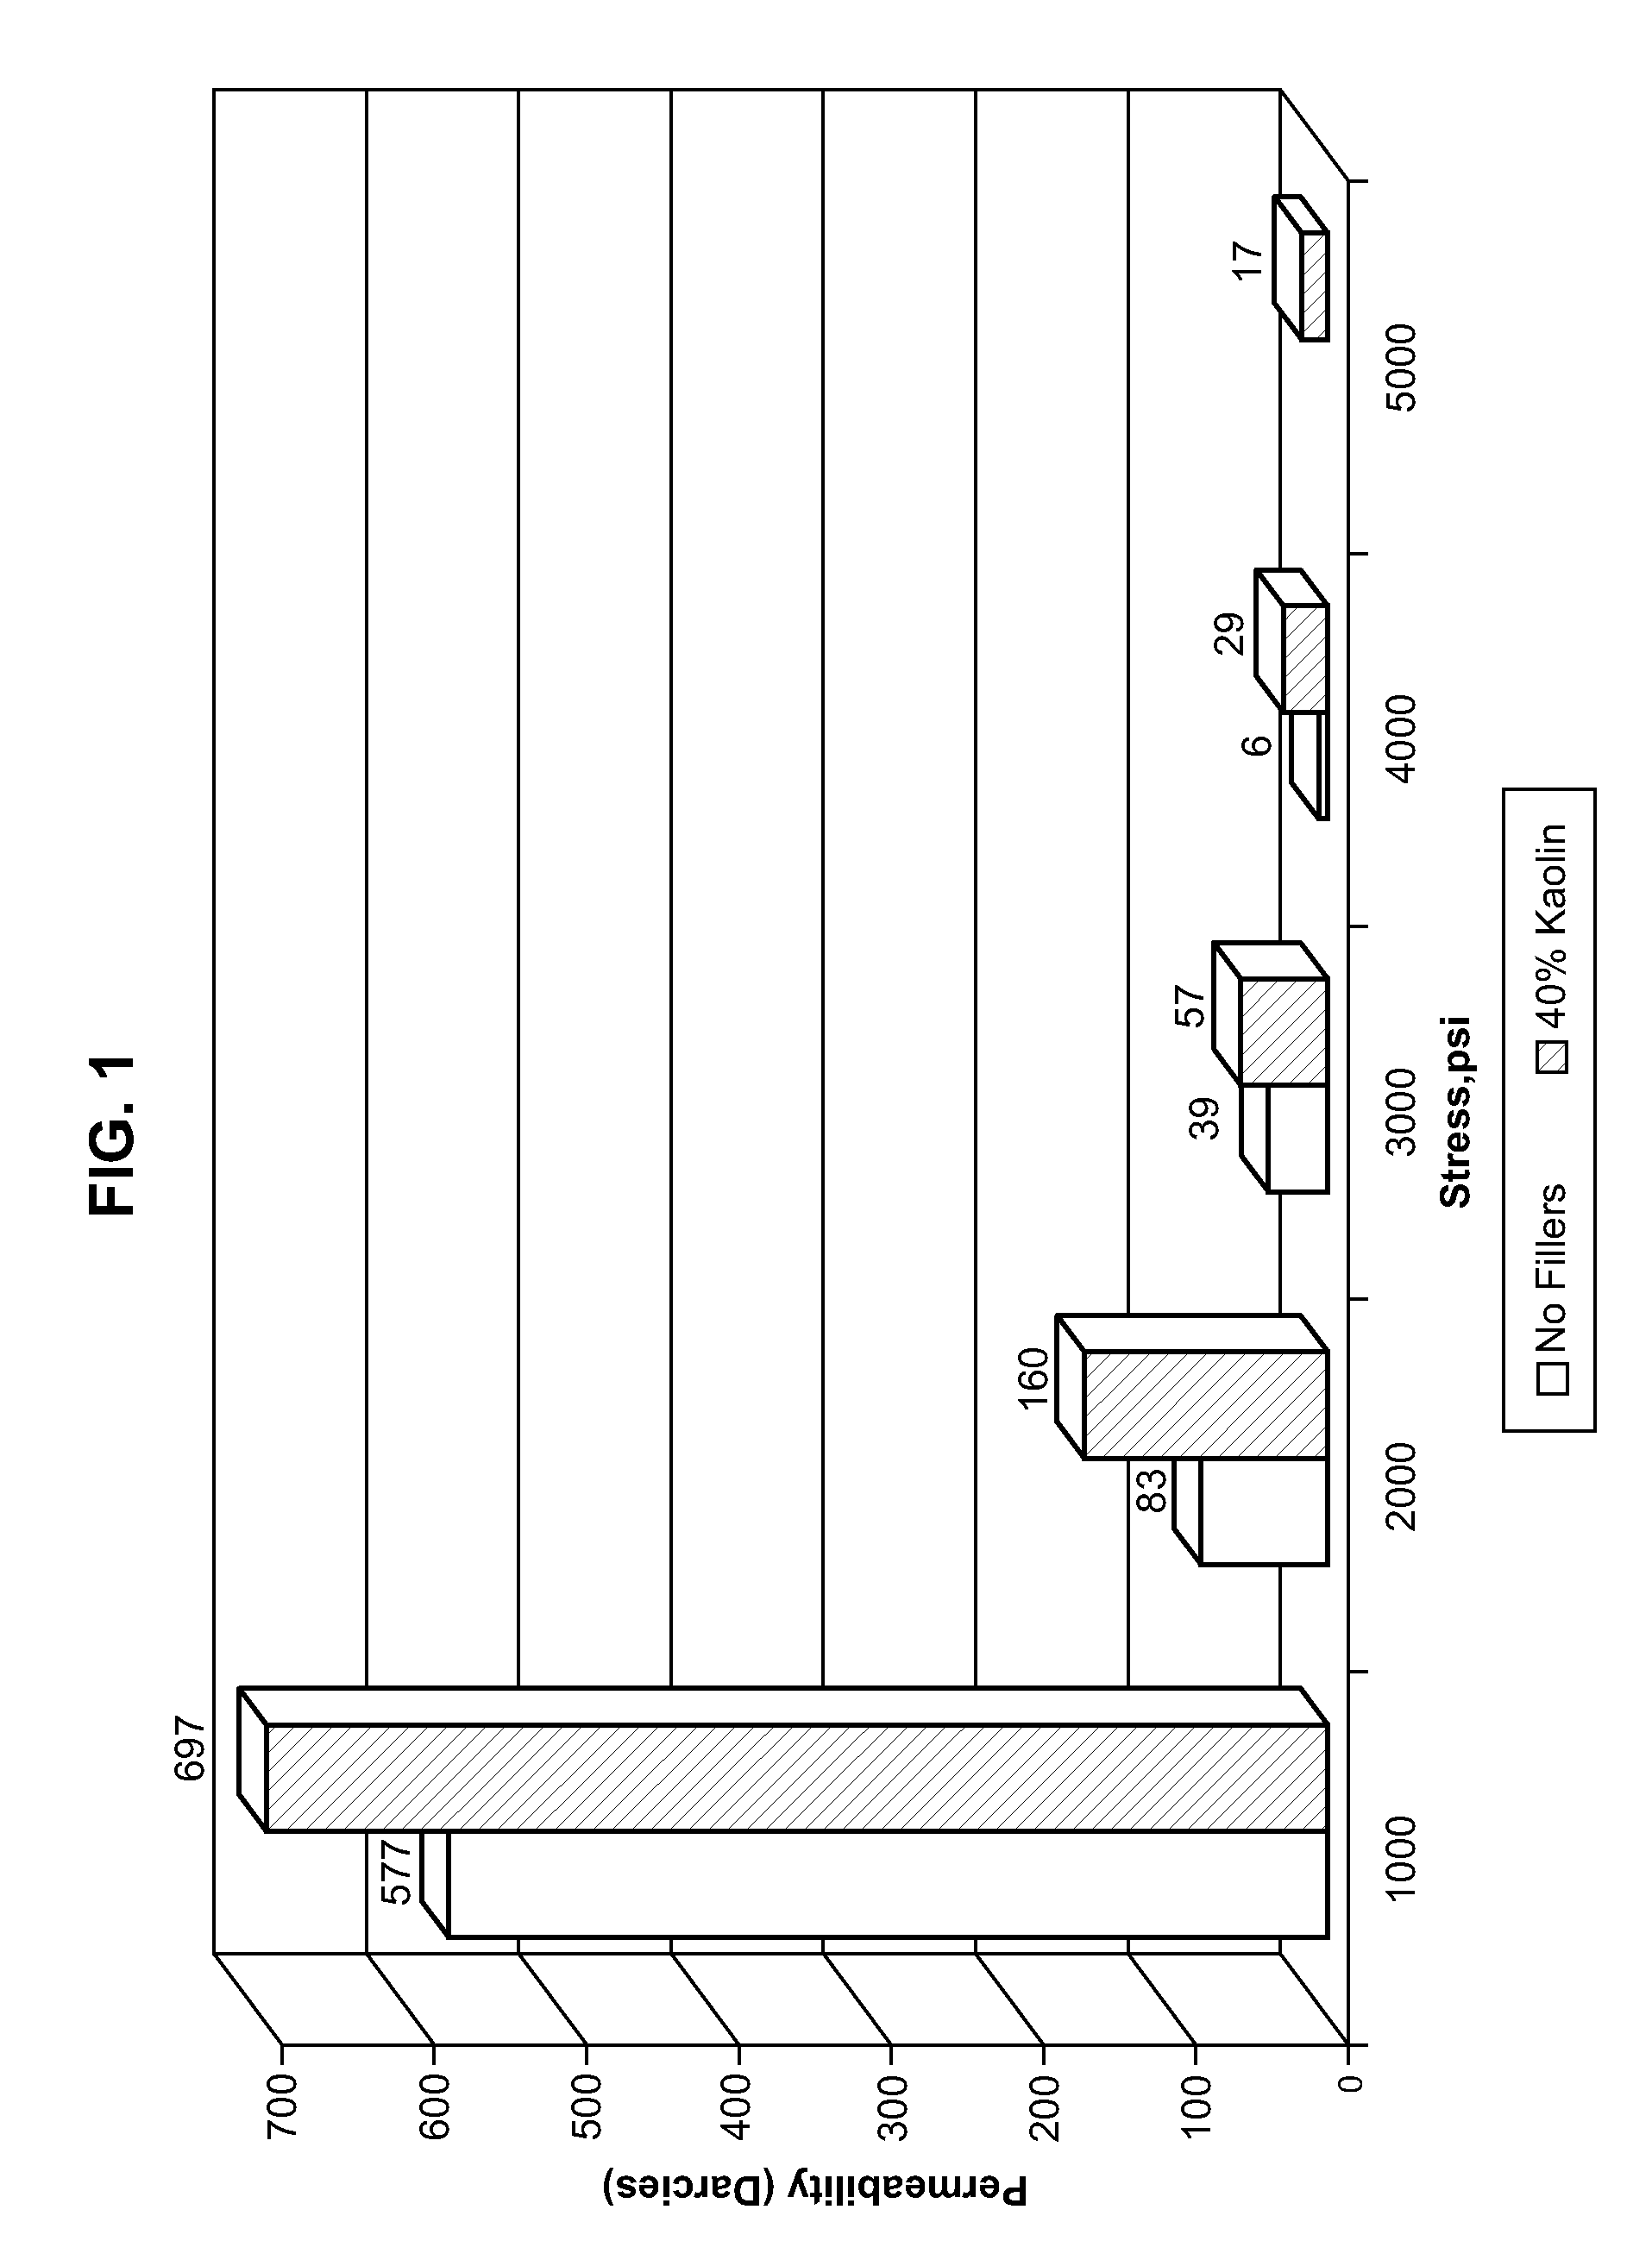 Method of fracturing using lightweight polyamide particulates